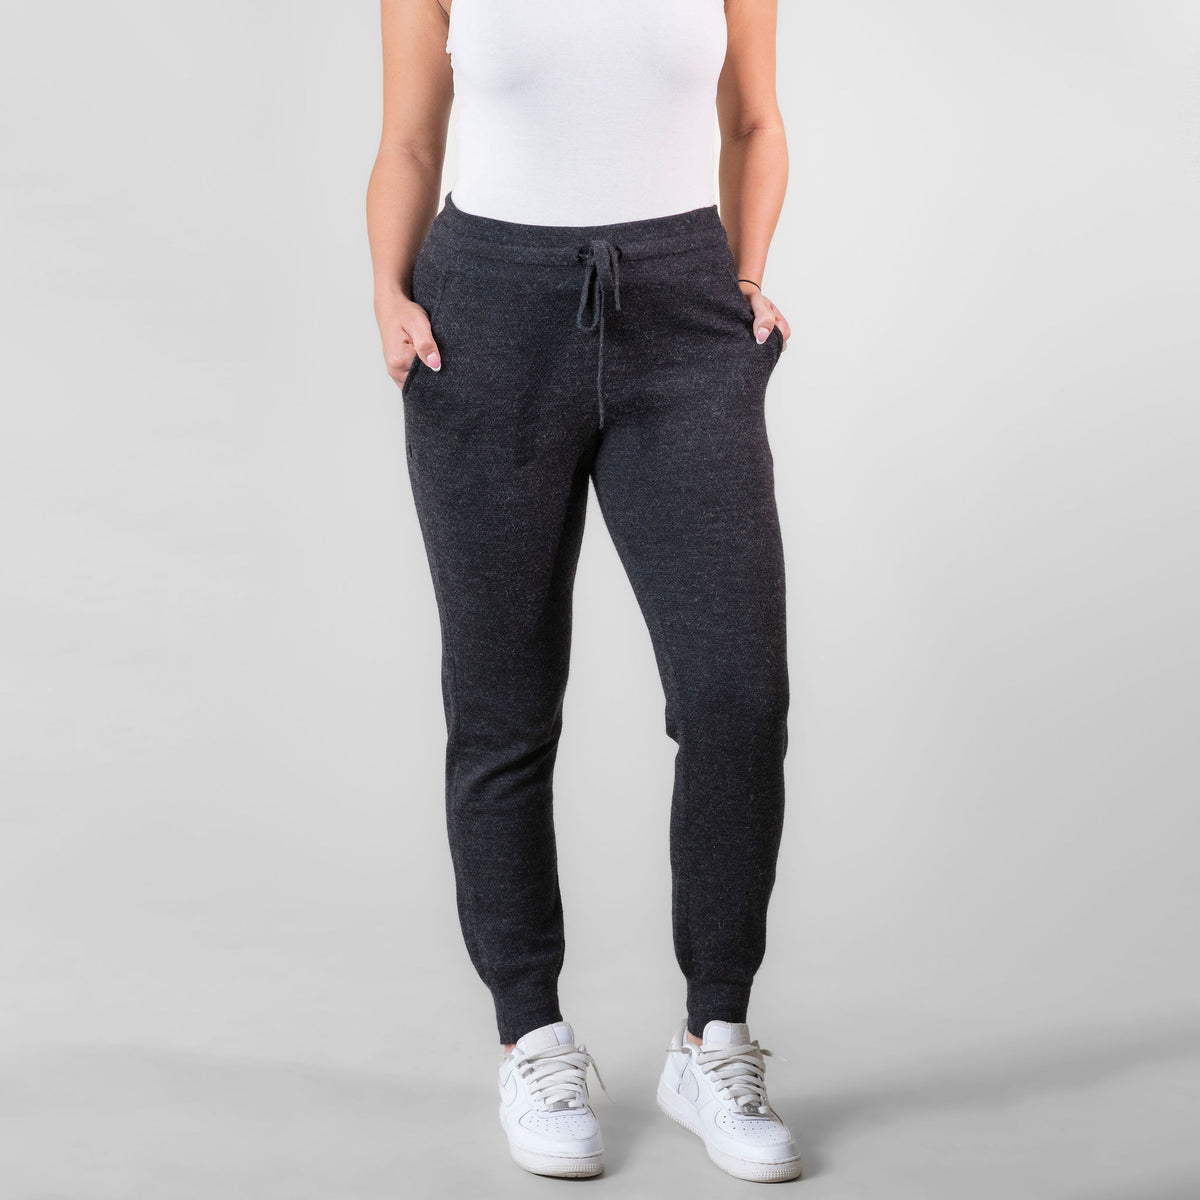 A bust-down photo of a woman standing against a white background. She is wearing white sneakers, a white tank top, and charcoal gray Alpacas of Montana soft cozy comfortable lightweight lounge moisture wicking antimicrobial exercise women&#39;s 24/7 boyfriend joggers sweatpants made from alpaca wool for lounging, comfort, exercise, hiking, skiing